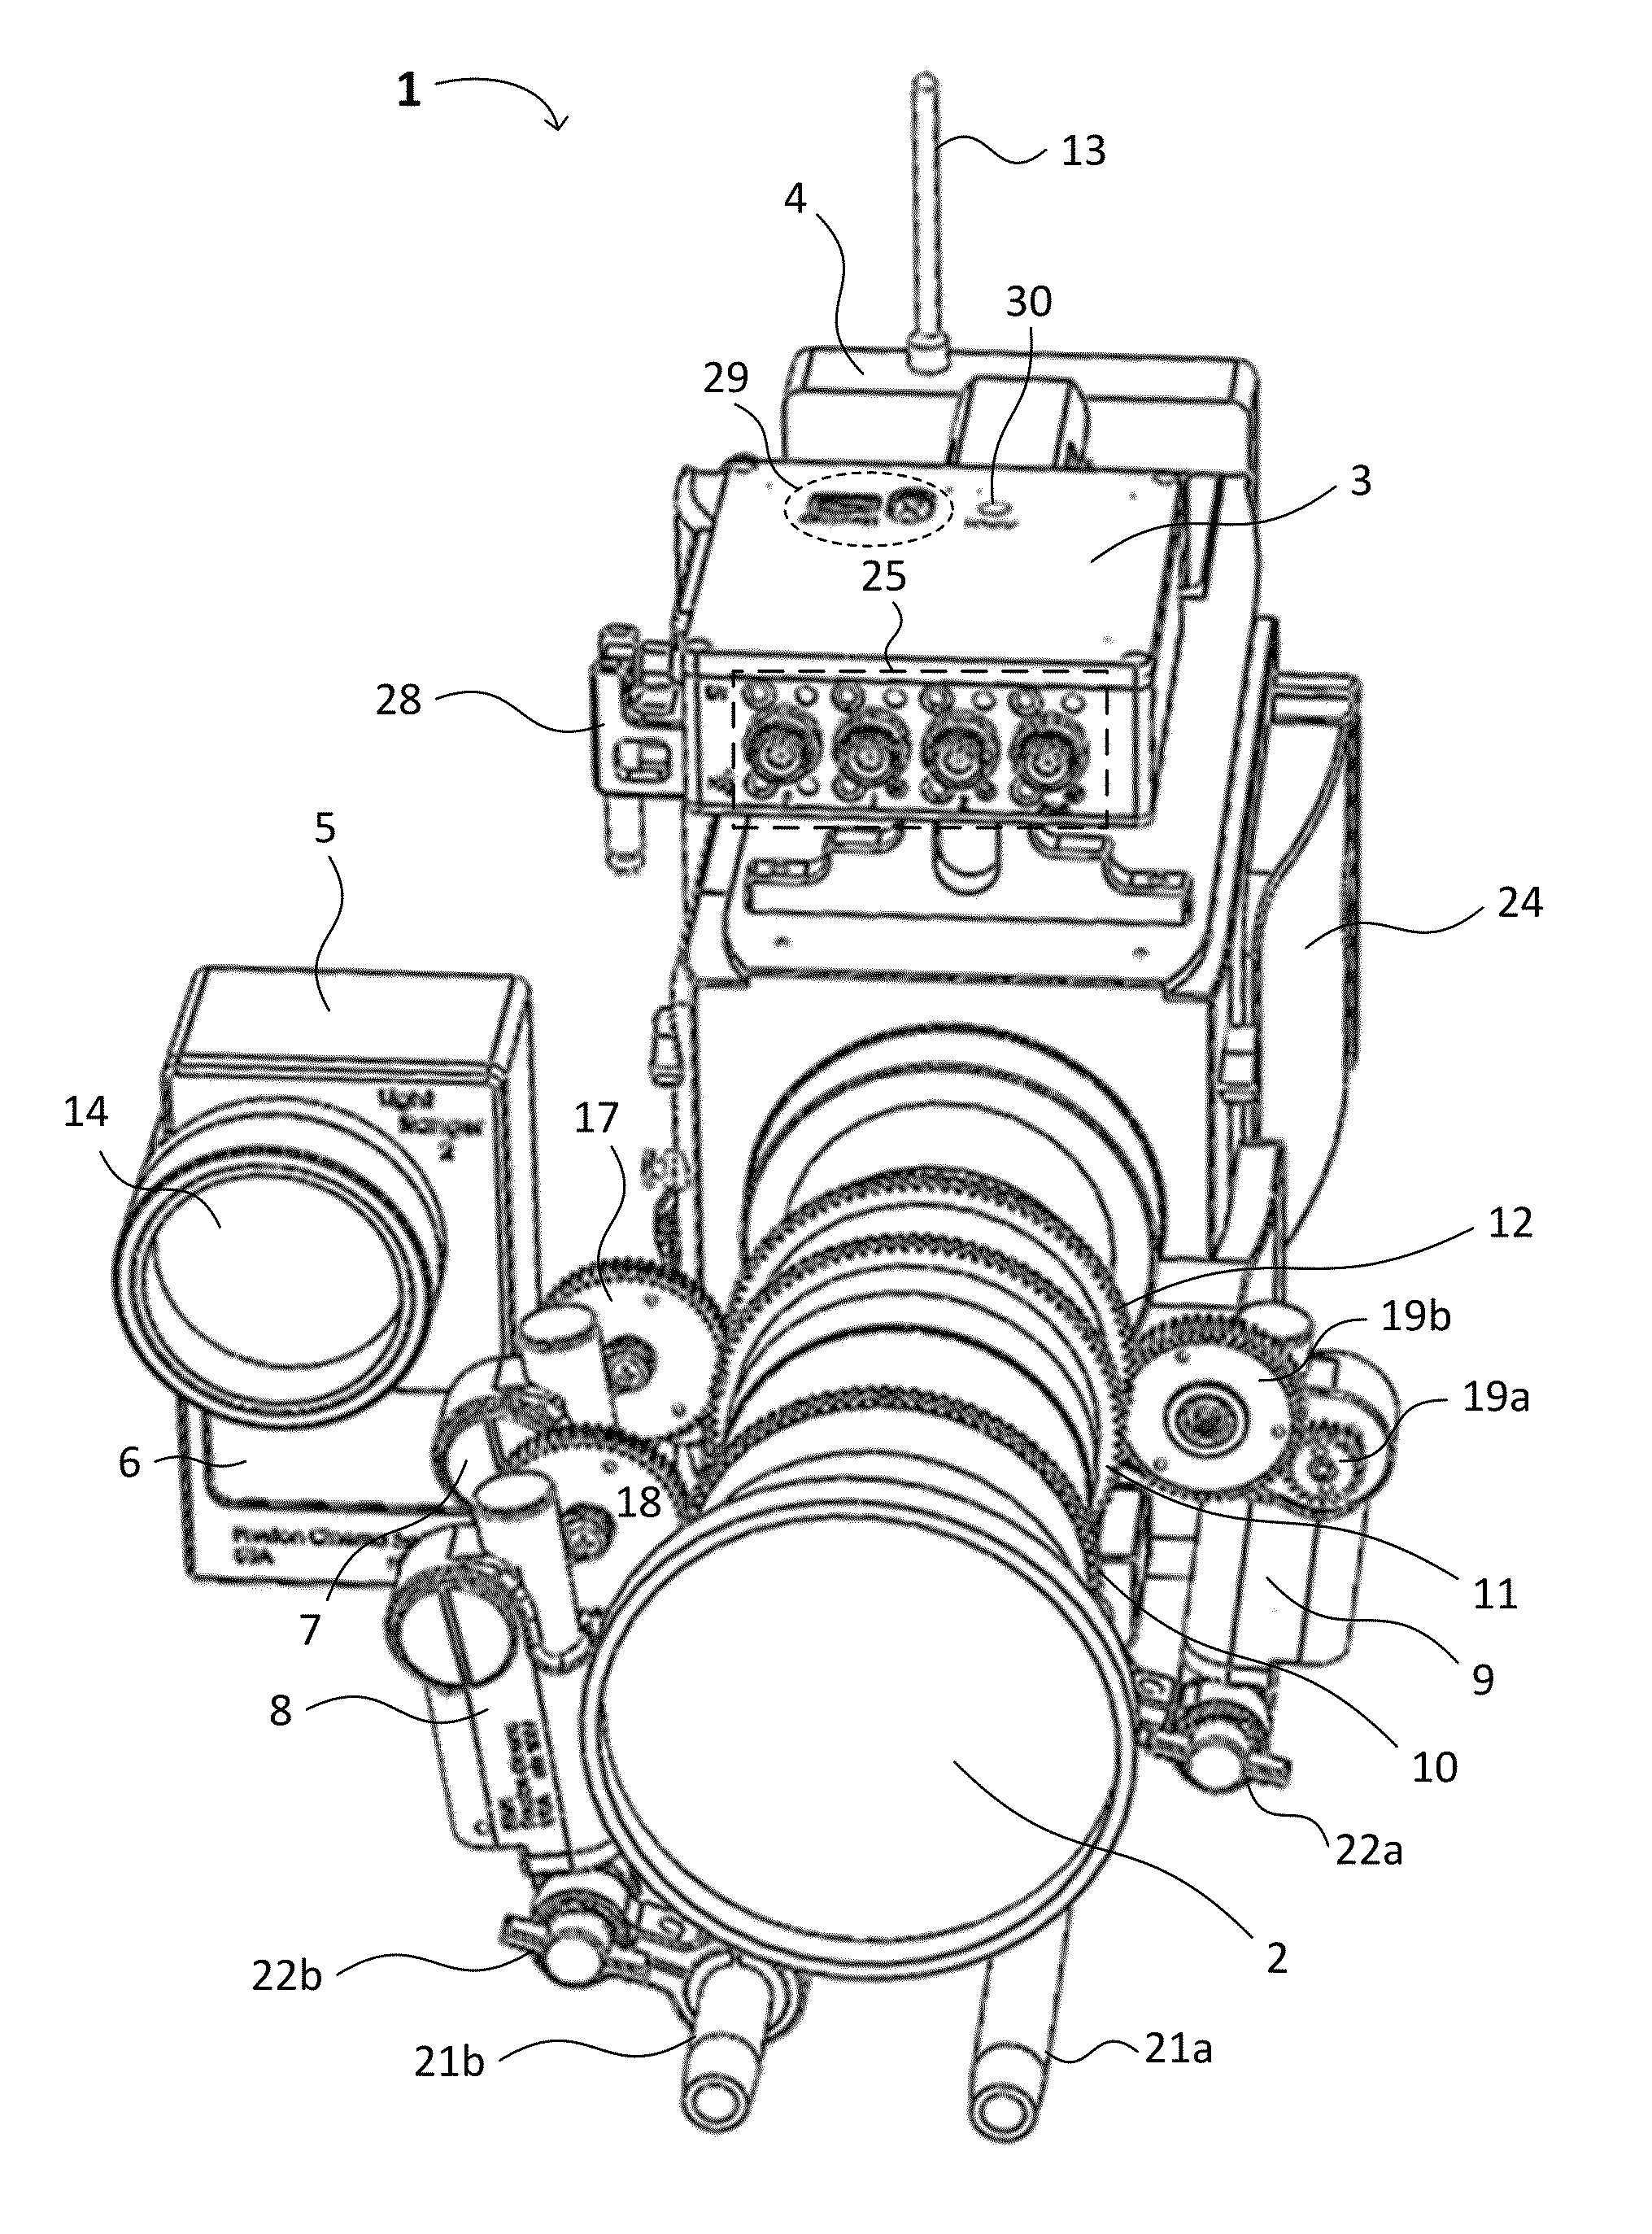 Methods, apparatuses, systems and software for focusing a camera on an object in any of a plurality of zones using graphics overlaid on a display